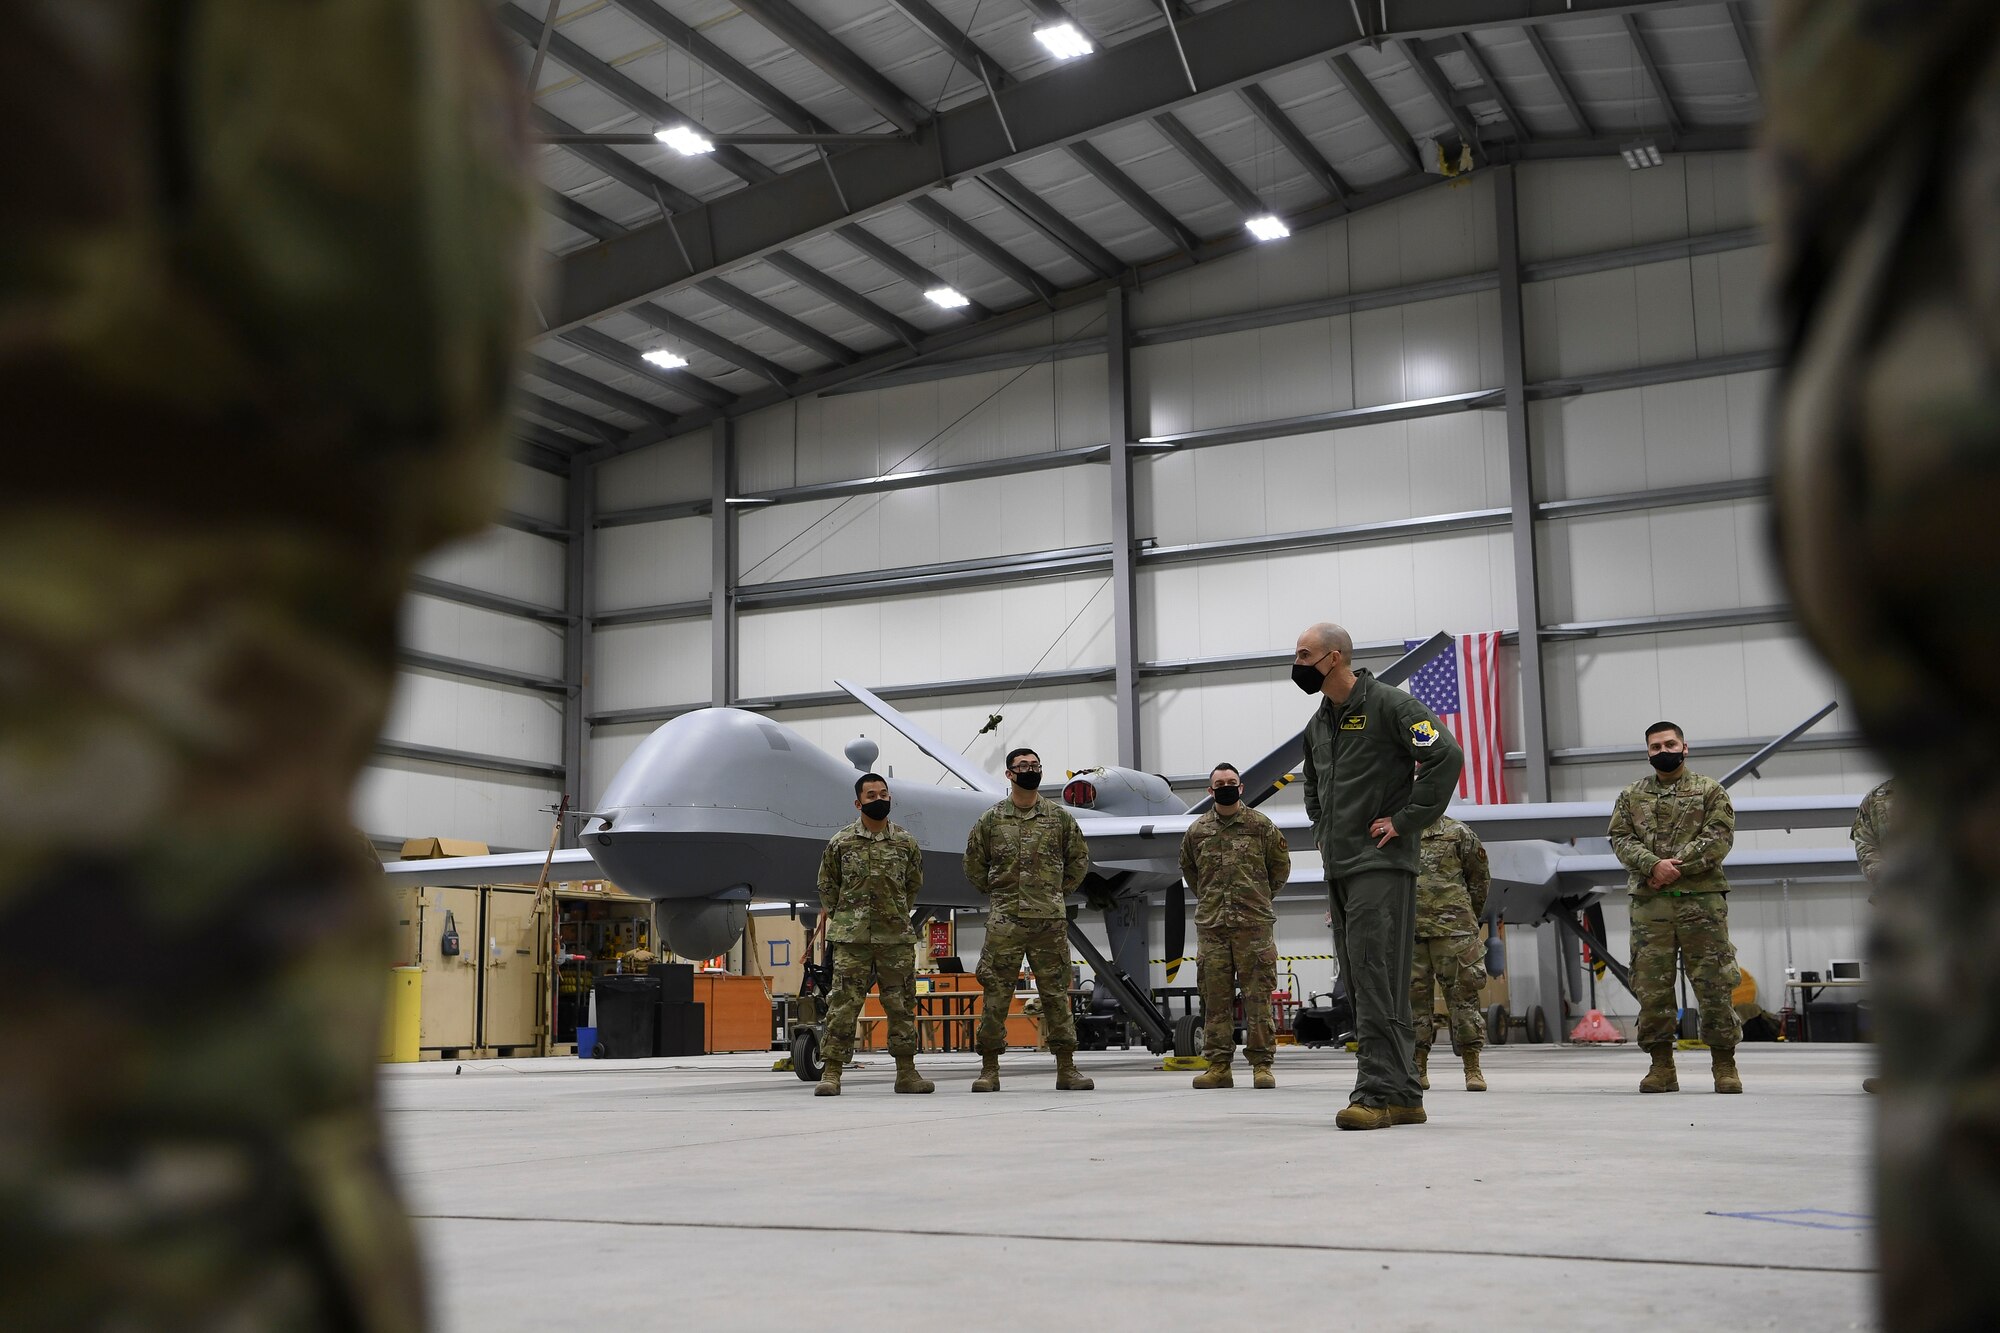 During their visit to Campia Turzii, 31st FW leadership discussed the Romanian air force, U.S. and Romanian partnership, base capabilities and bilateral infrastructure development with Romanian air force leadership and key defense leaders in the region.